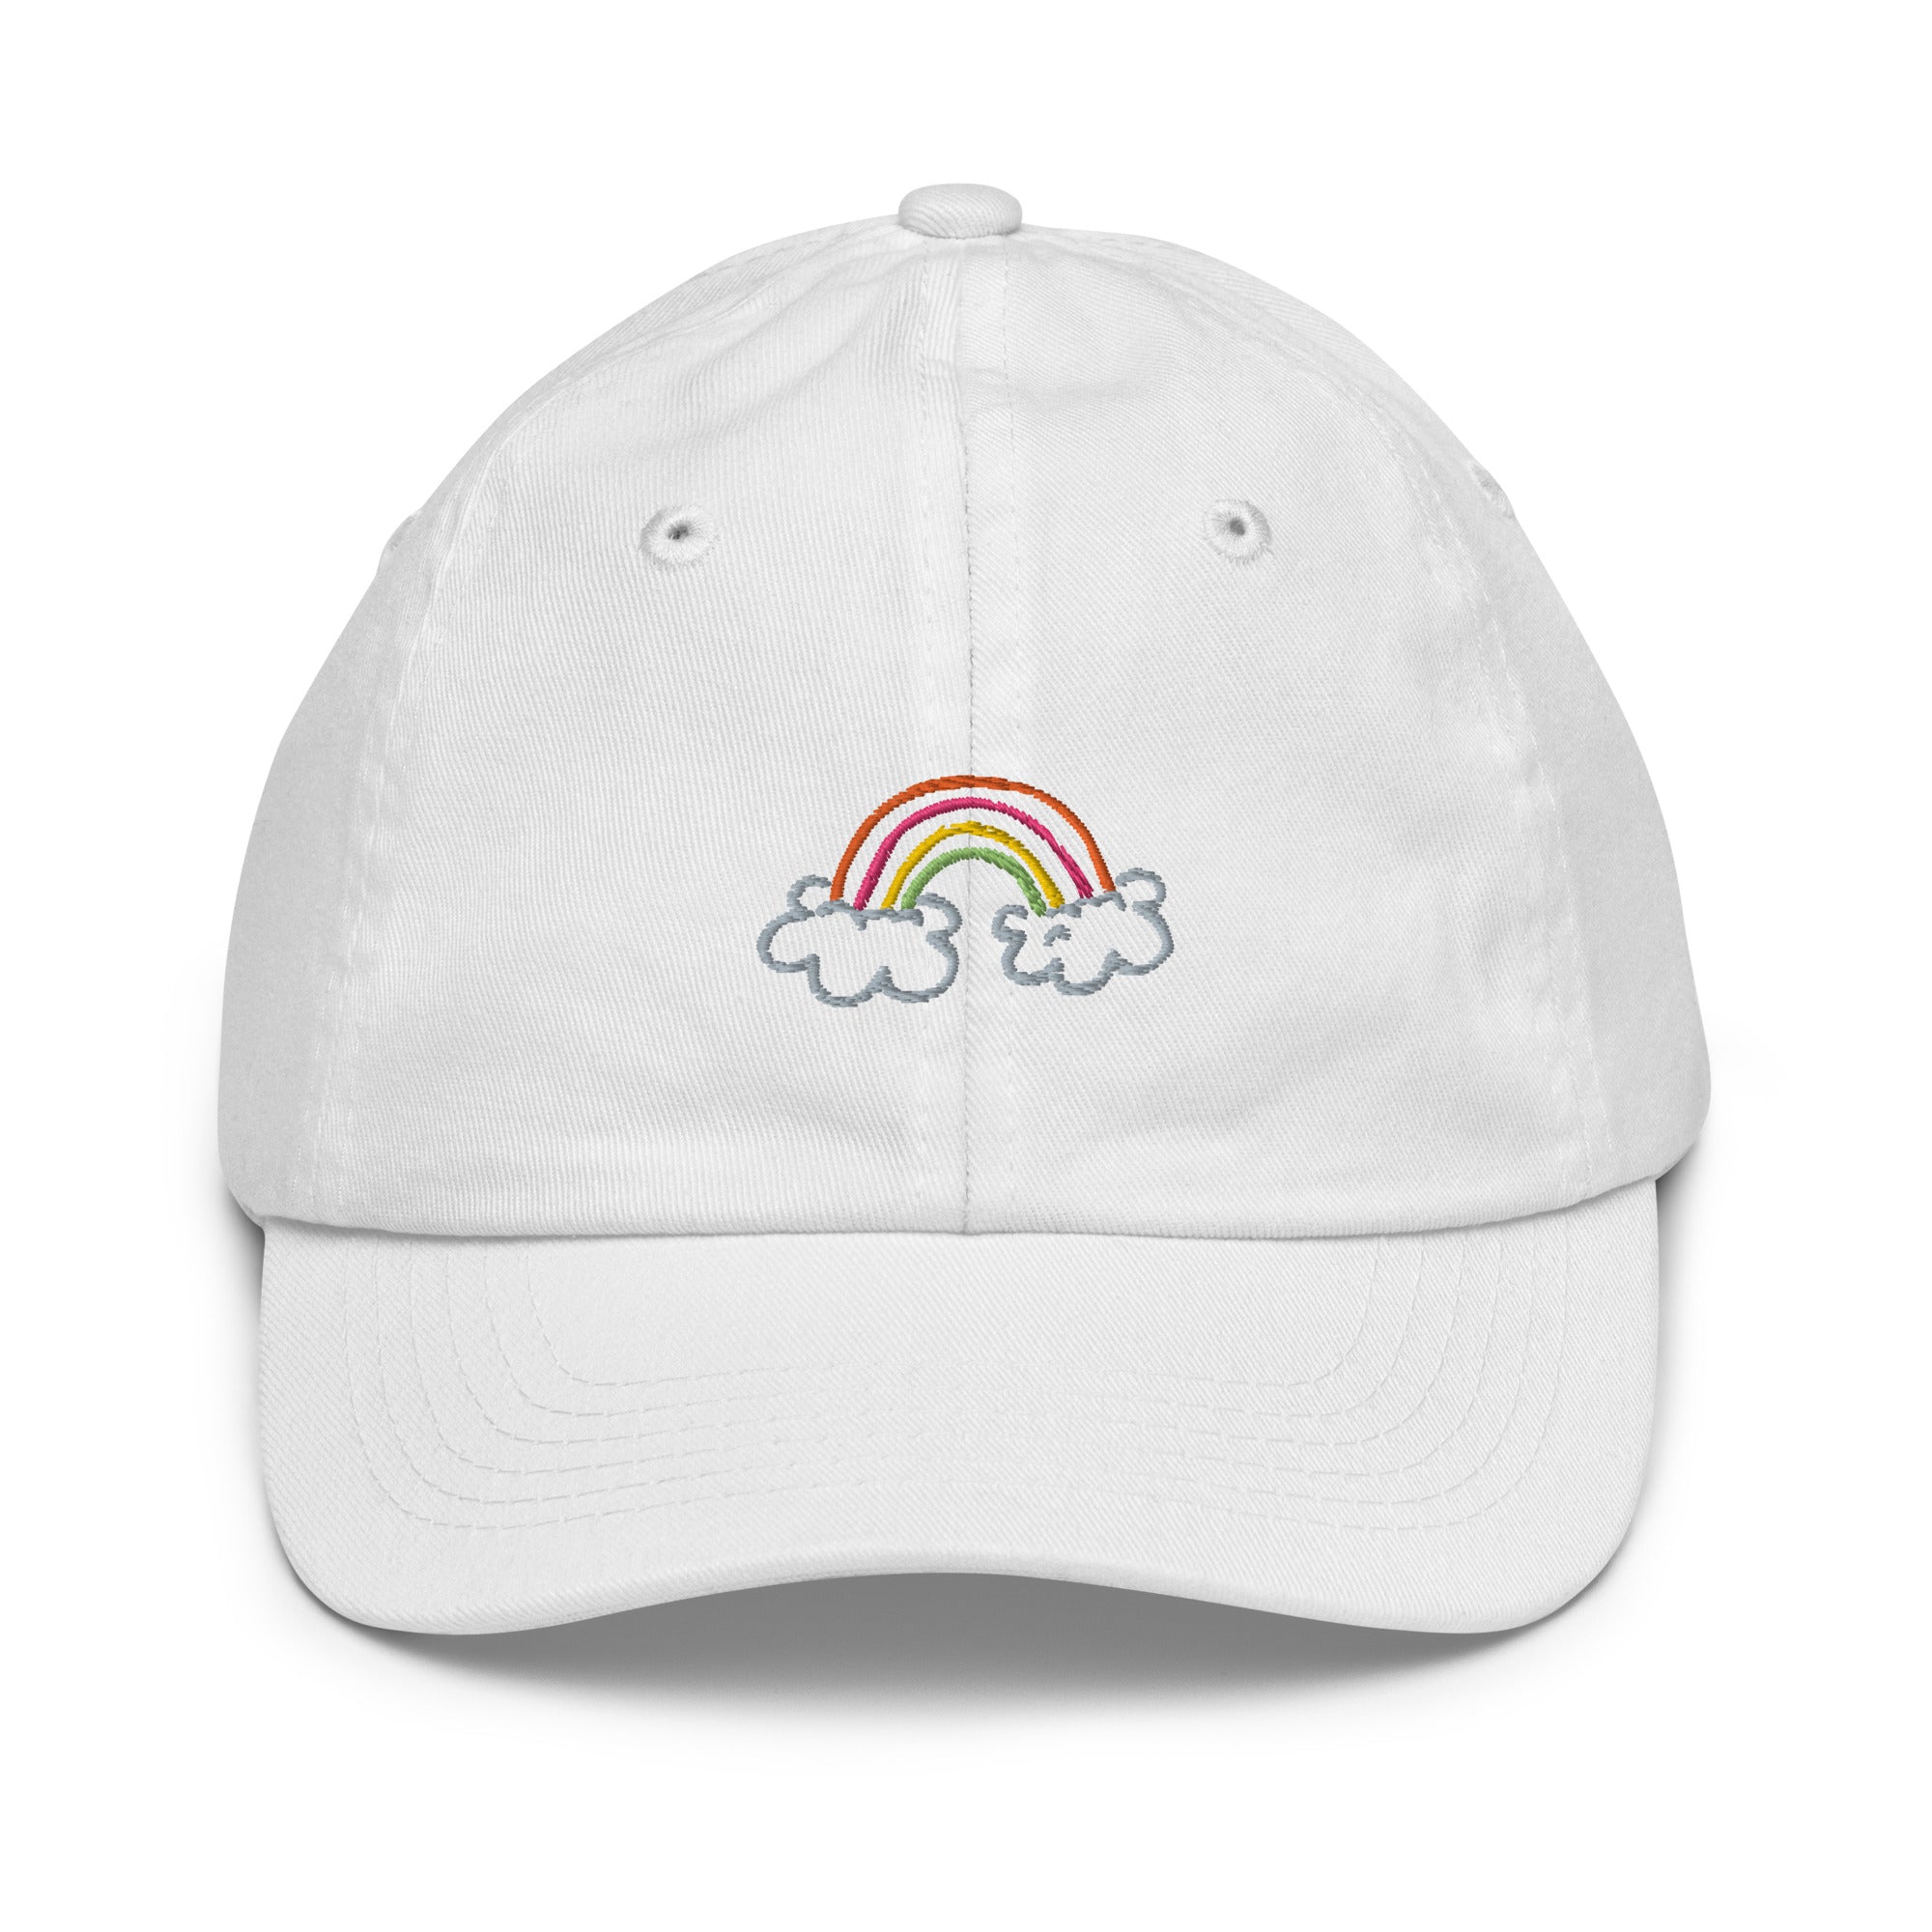 Kids hat with a rainbow